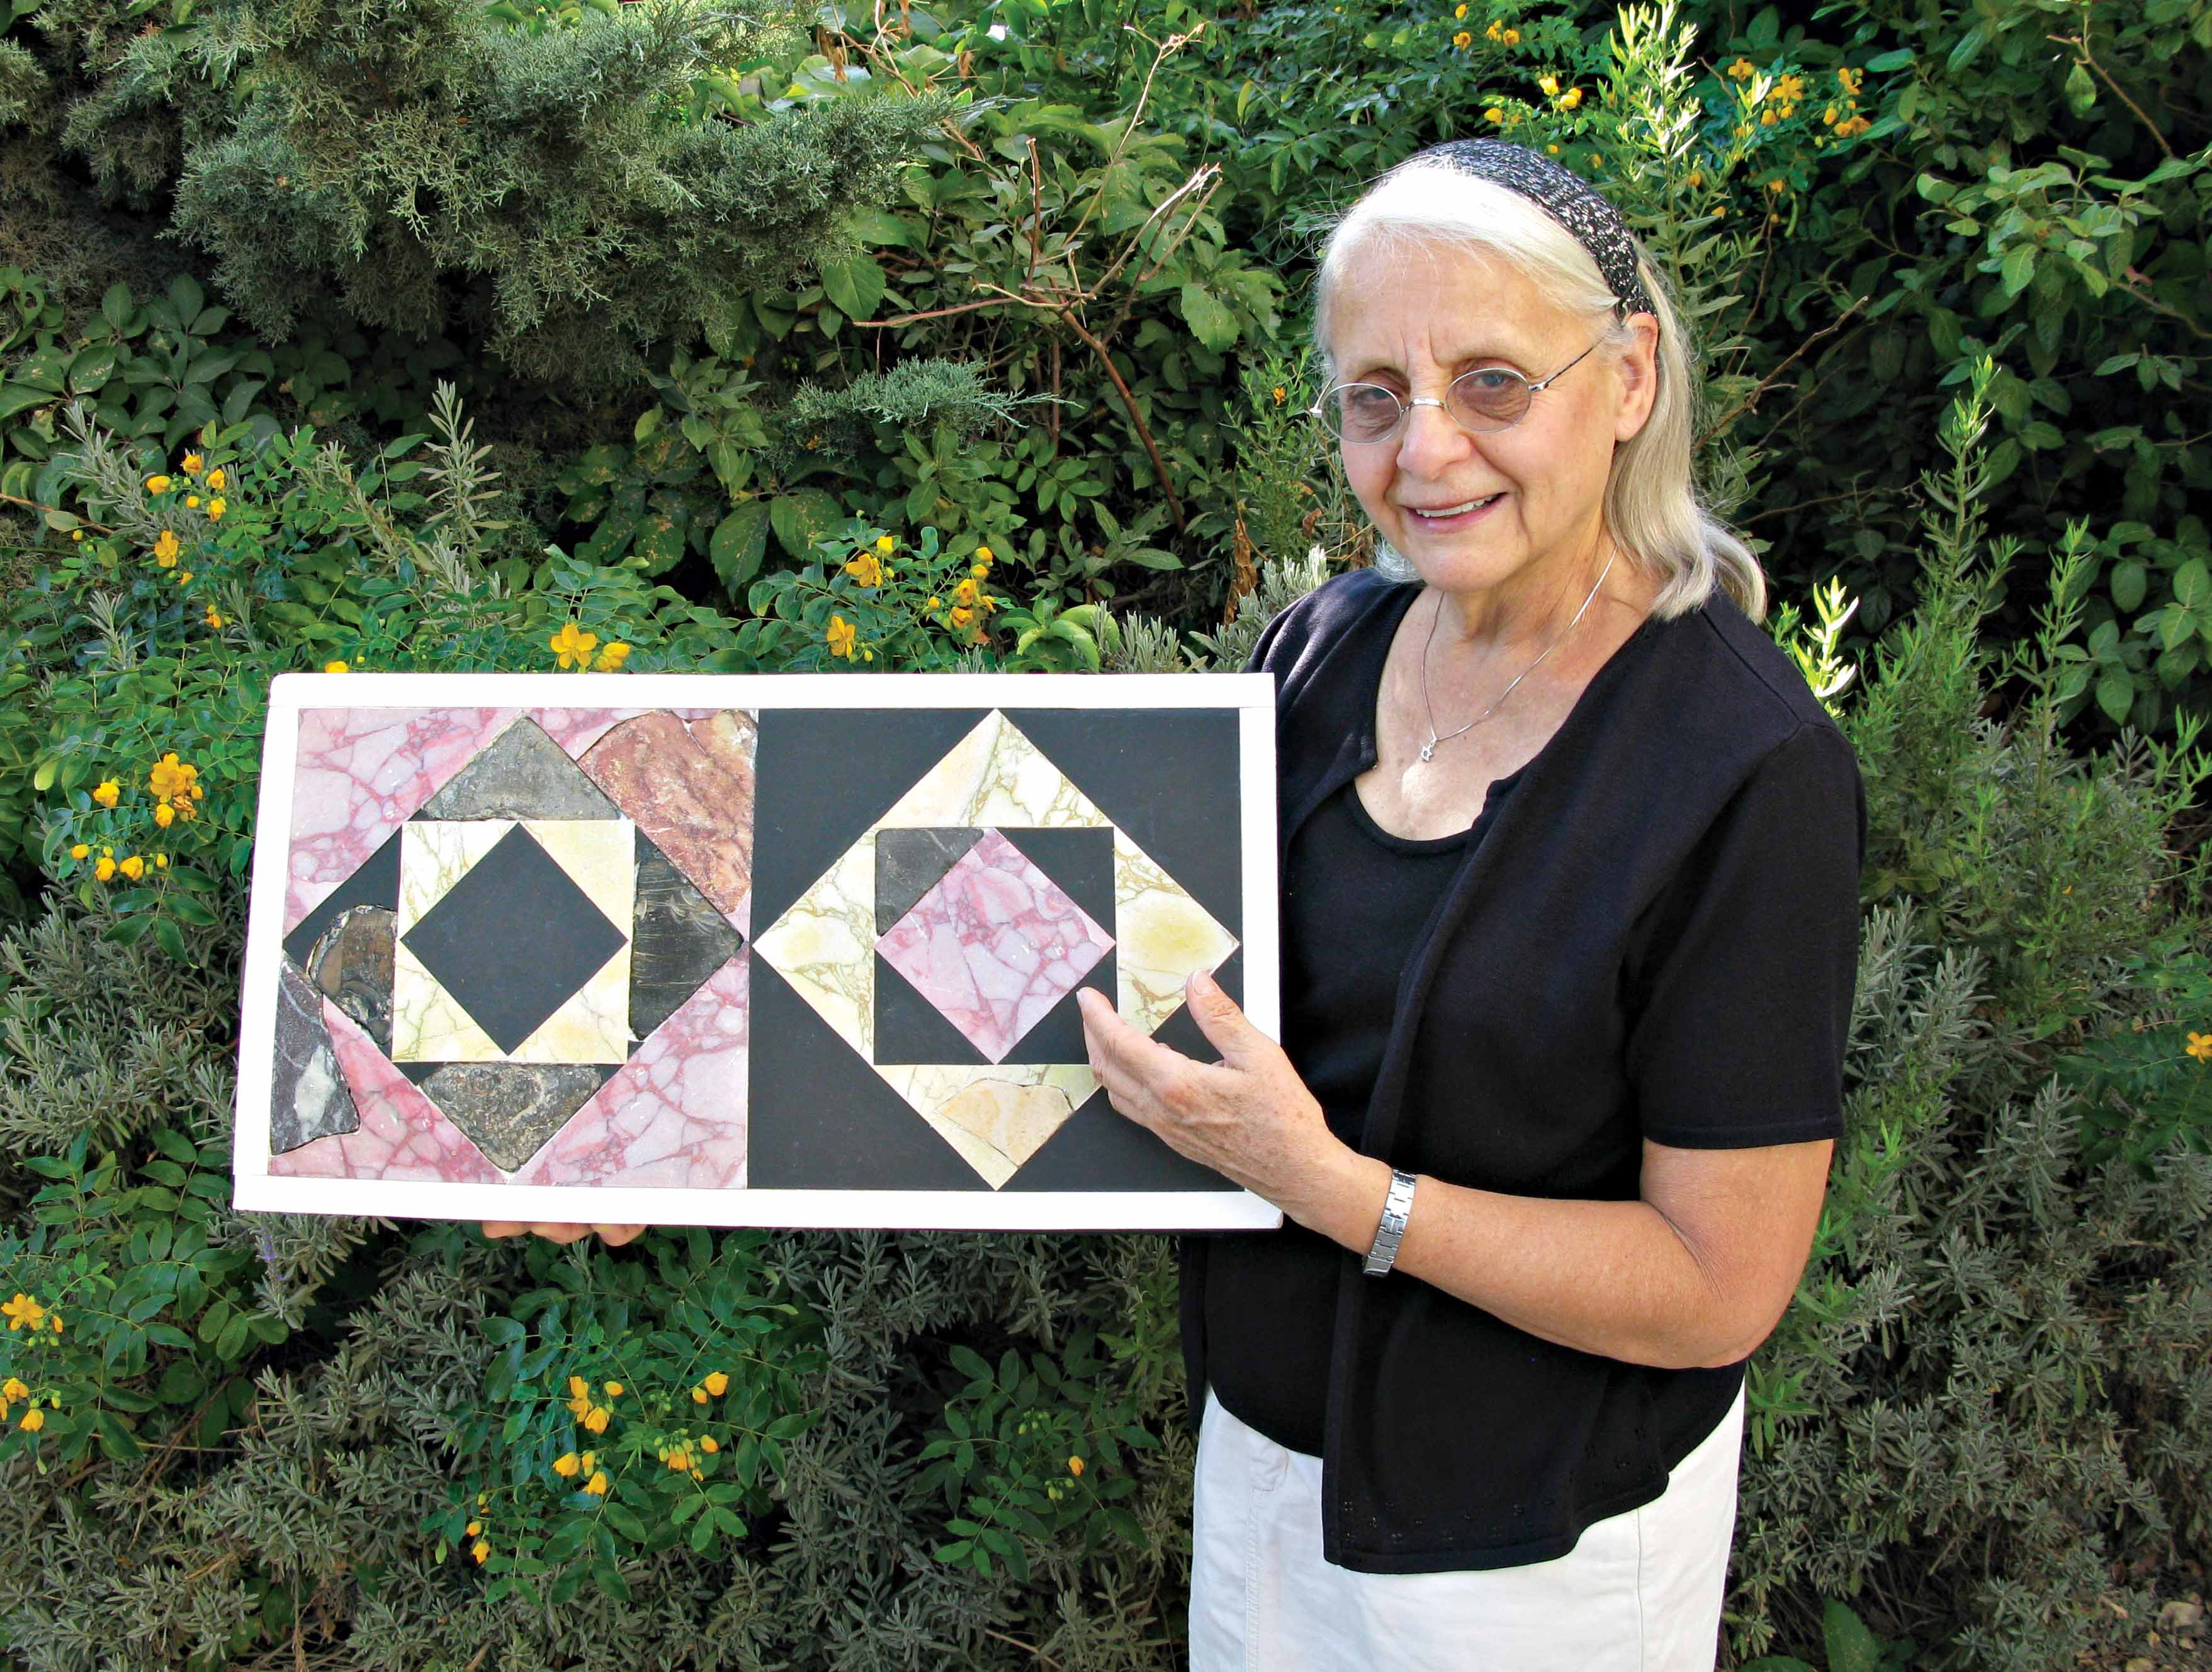 Adding it up. Statistician and mathematician Frankie Schneider with her mock-up of Temple floor designs, based on finds from the Temple Mount Sifting Project 